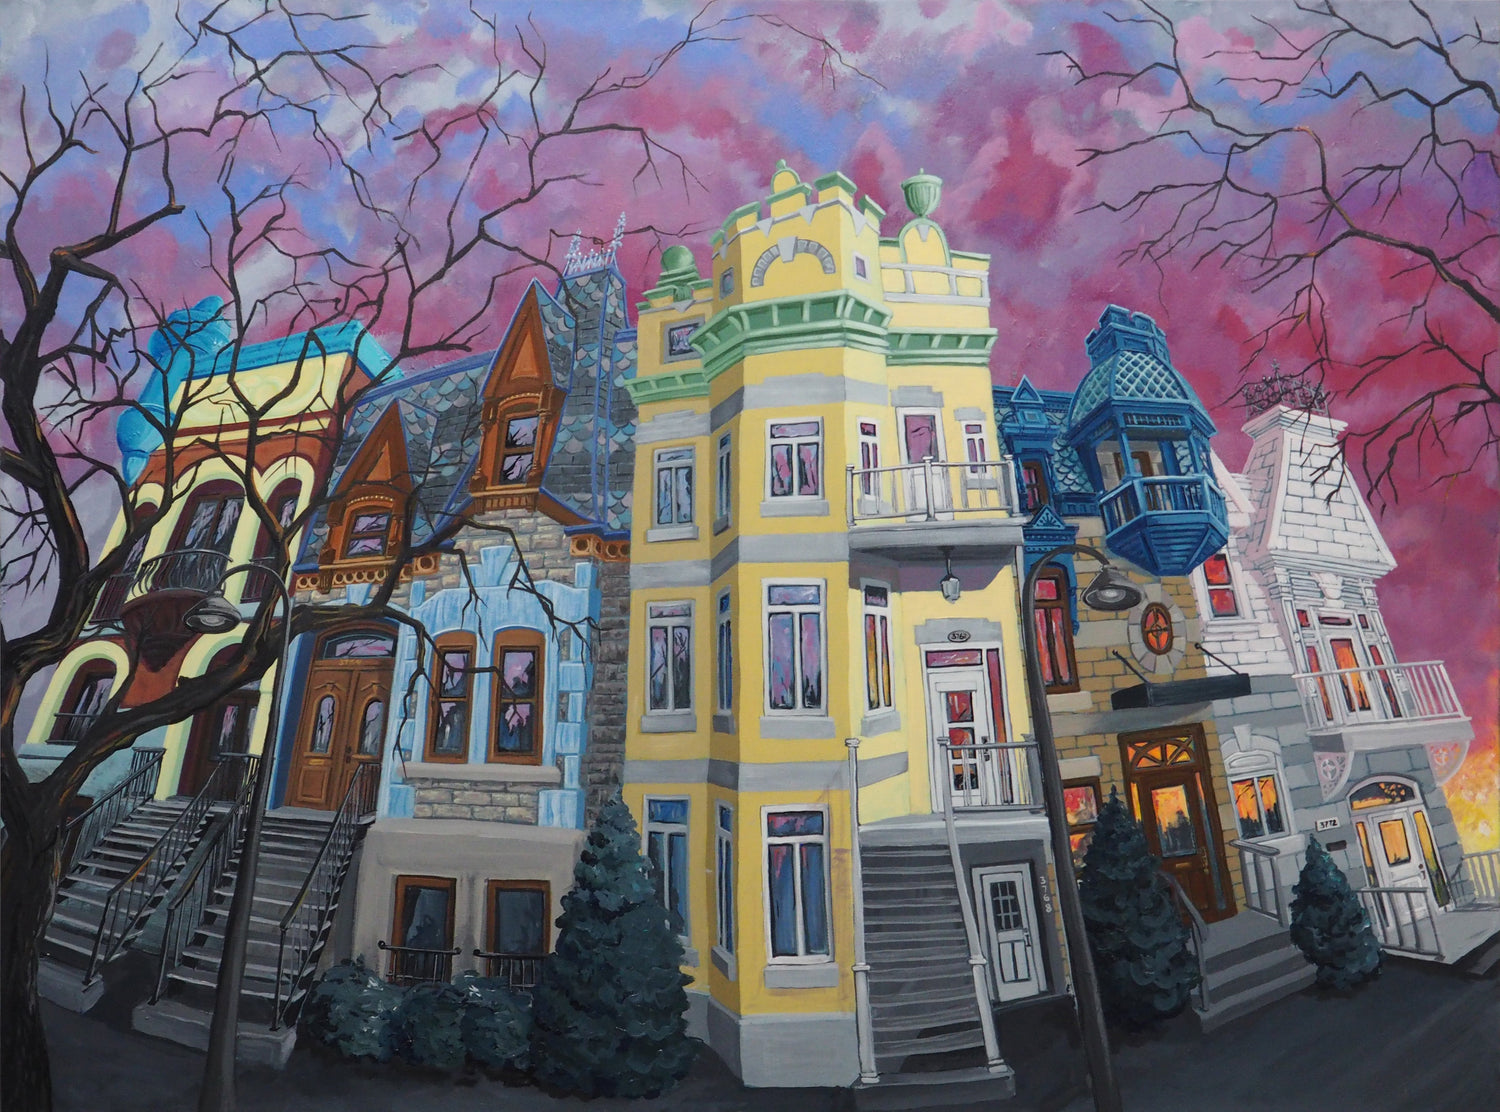 Urban Landscape sunset. À l'ouest du Parc Lafontaine historical house canadian urban landscape.Original painting by a famous canadian painter. purchase picture ready to hang on your wall